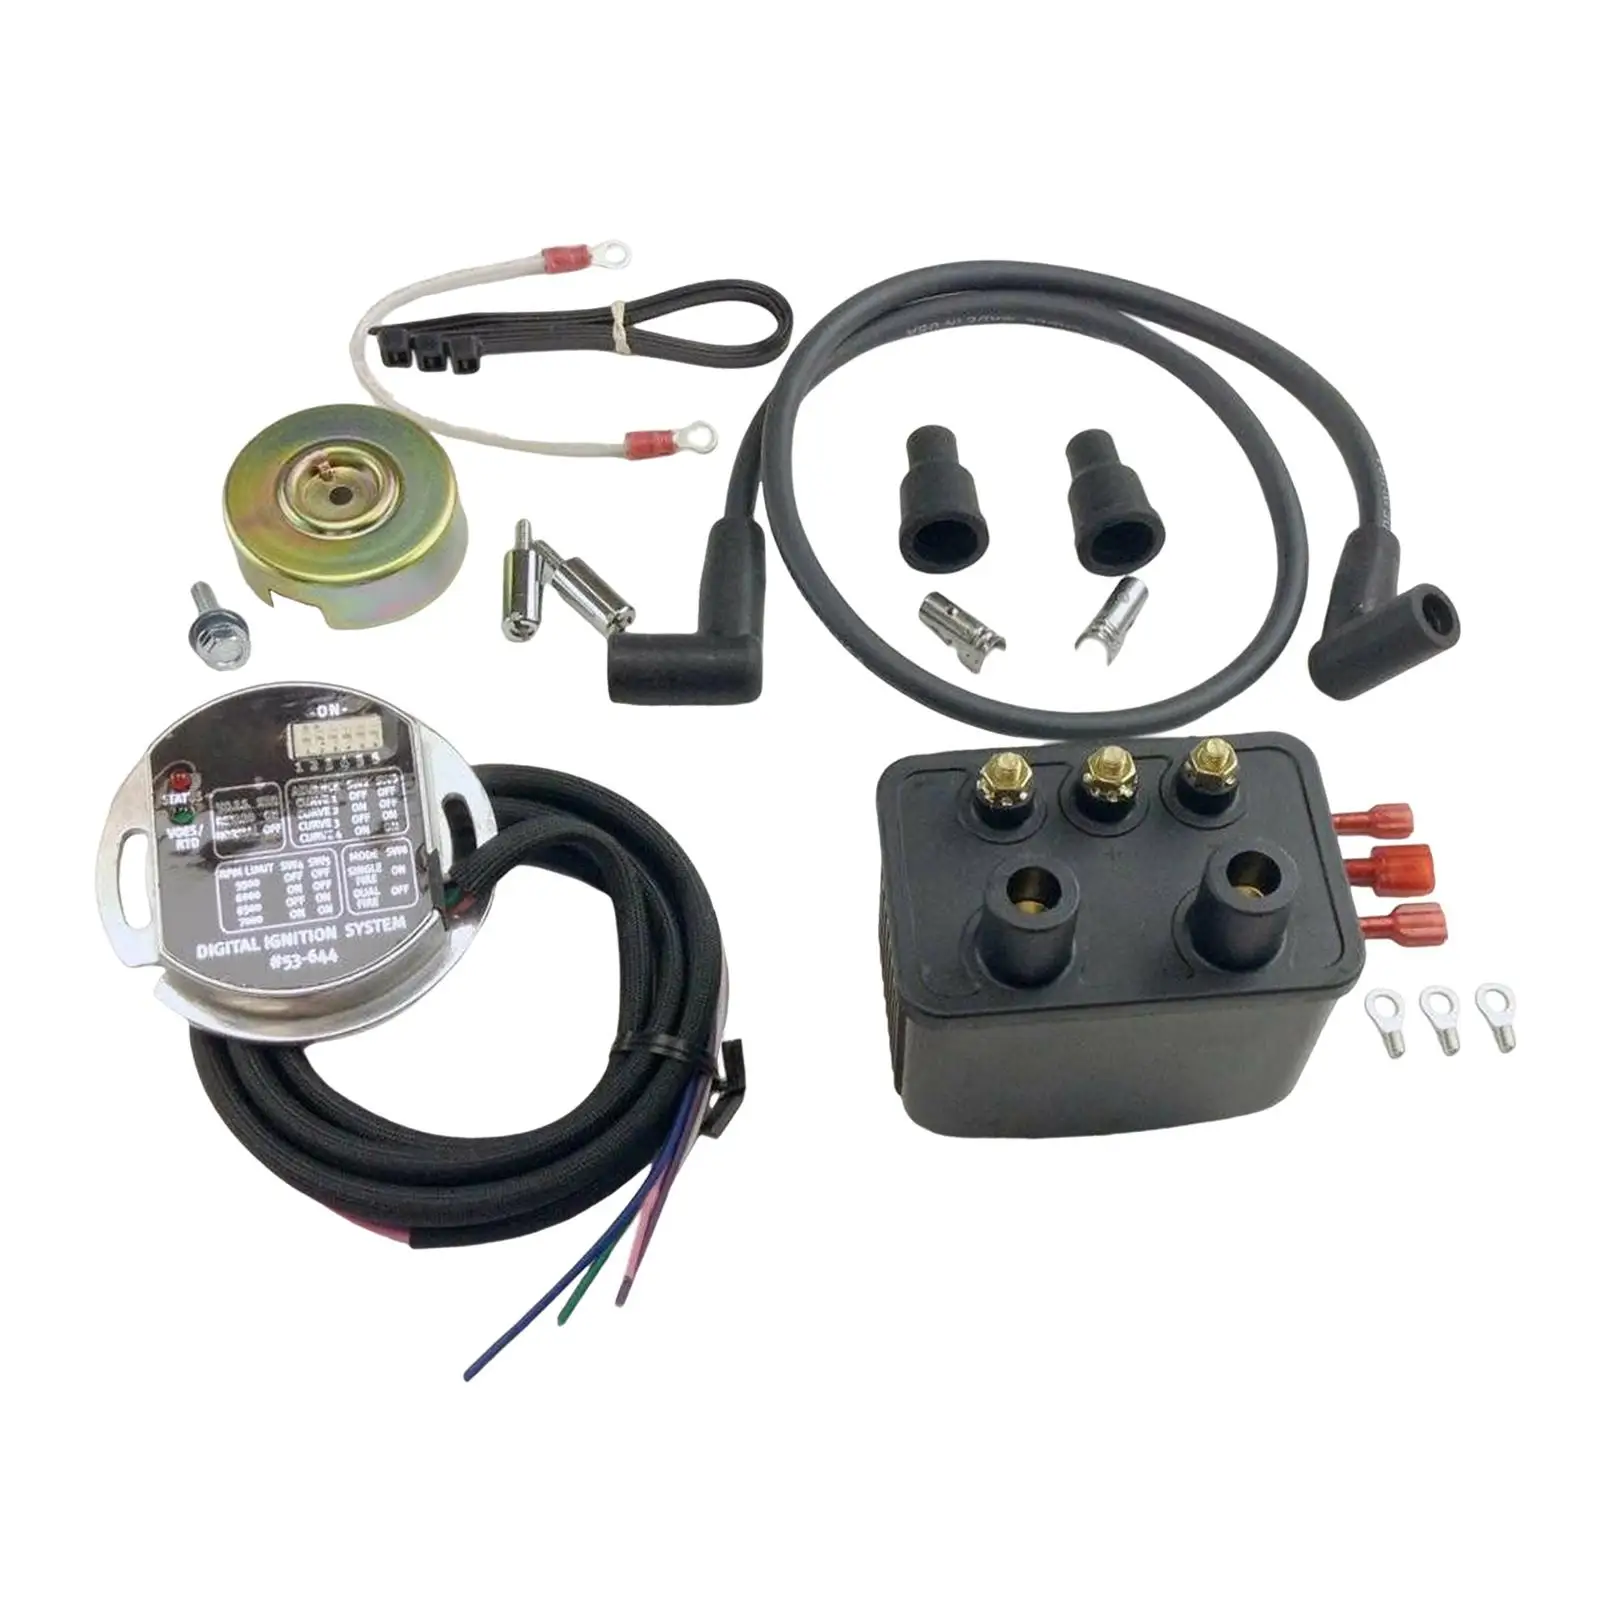 Electronic Ignition Kit Replaces for Harley Shovelhead Evolution Stable